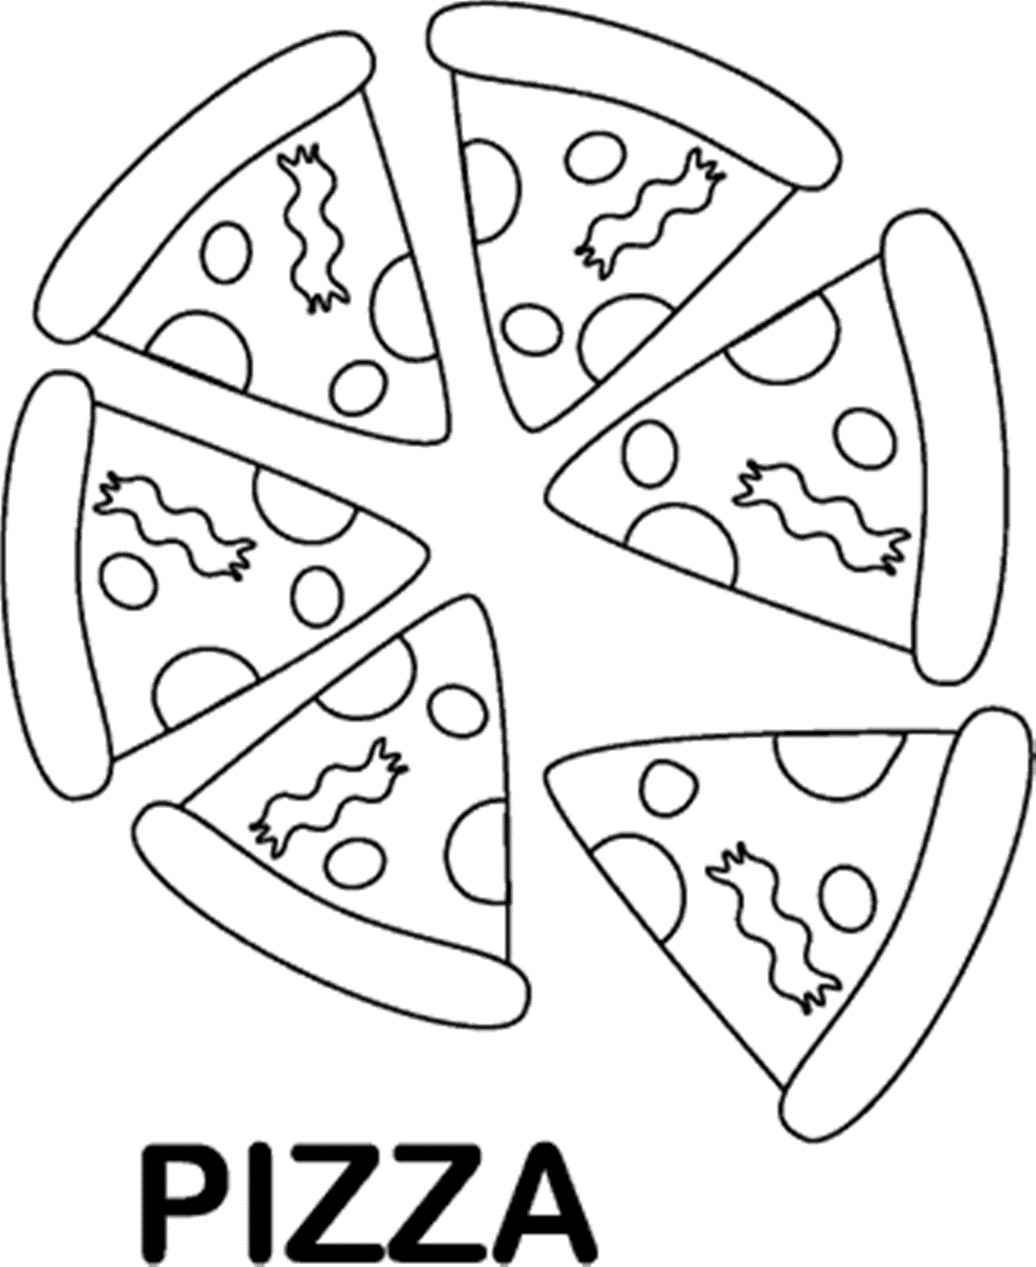 Free Pizza Coloring Pages Download Free Pizza Coloring Pages png